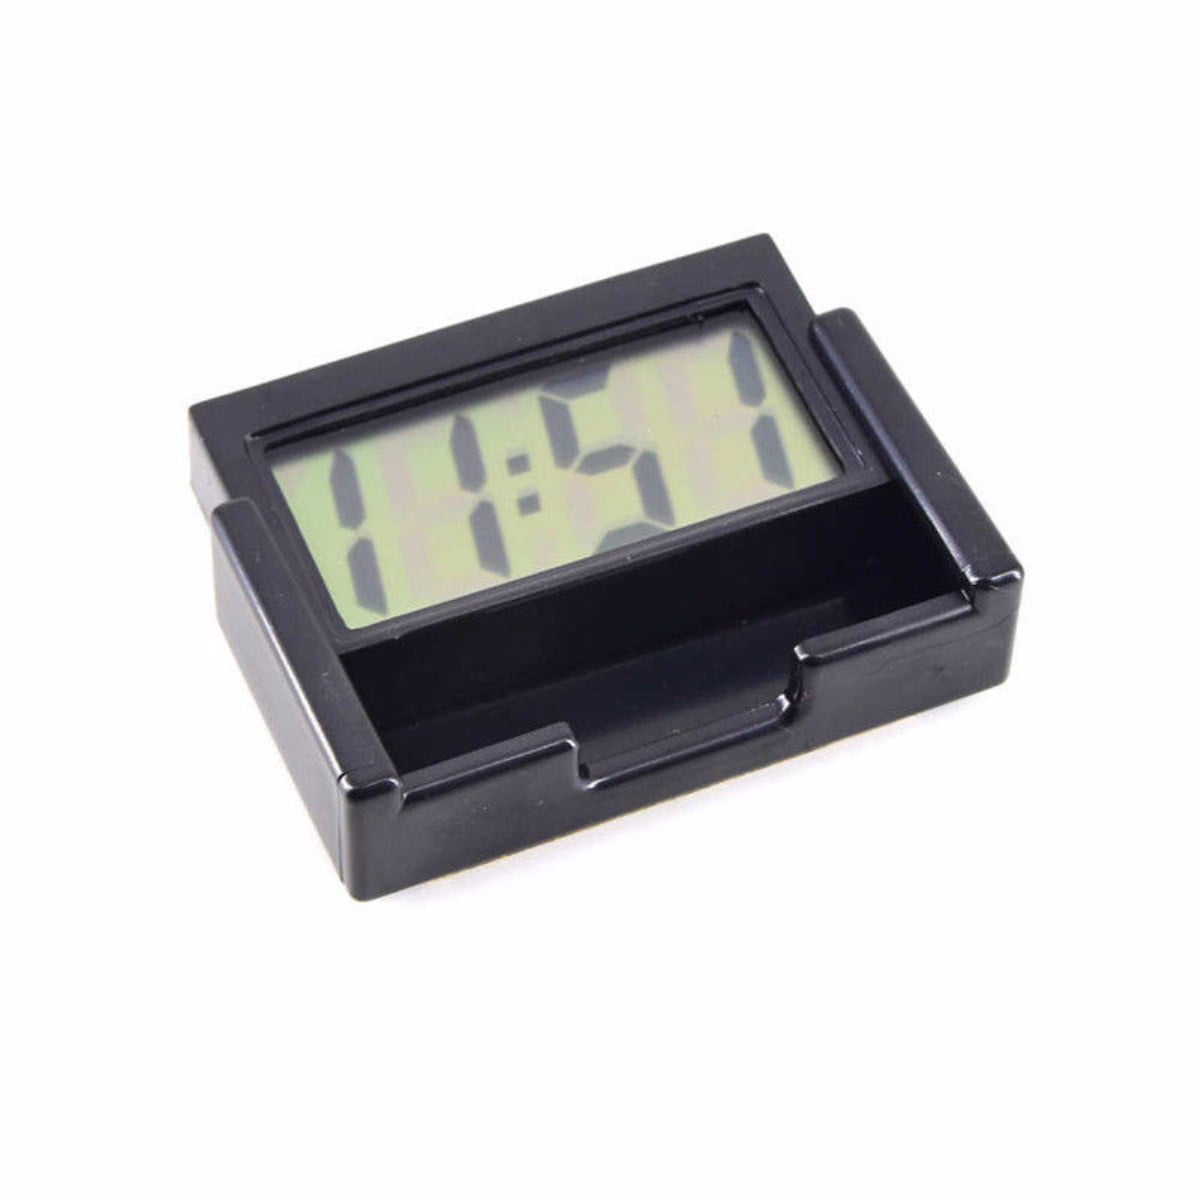 LCD Auto Digital Car Table Wall Clock Time Date Self-Adhesive Stick On Portable